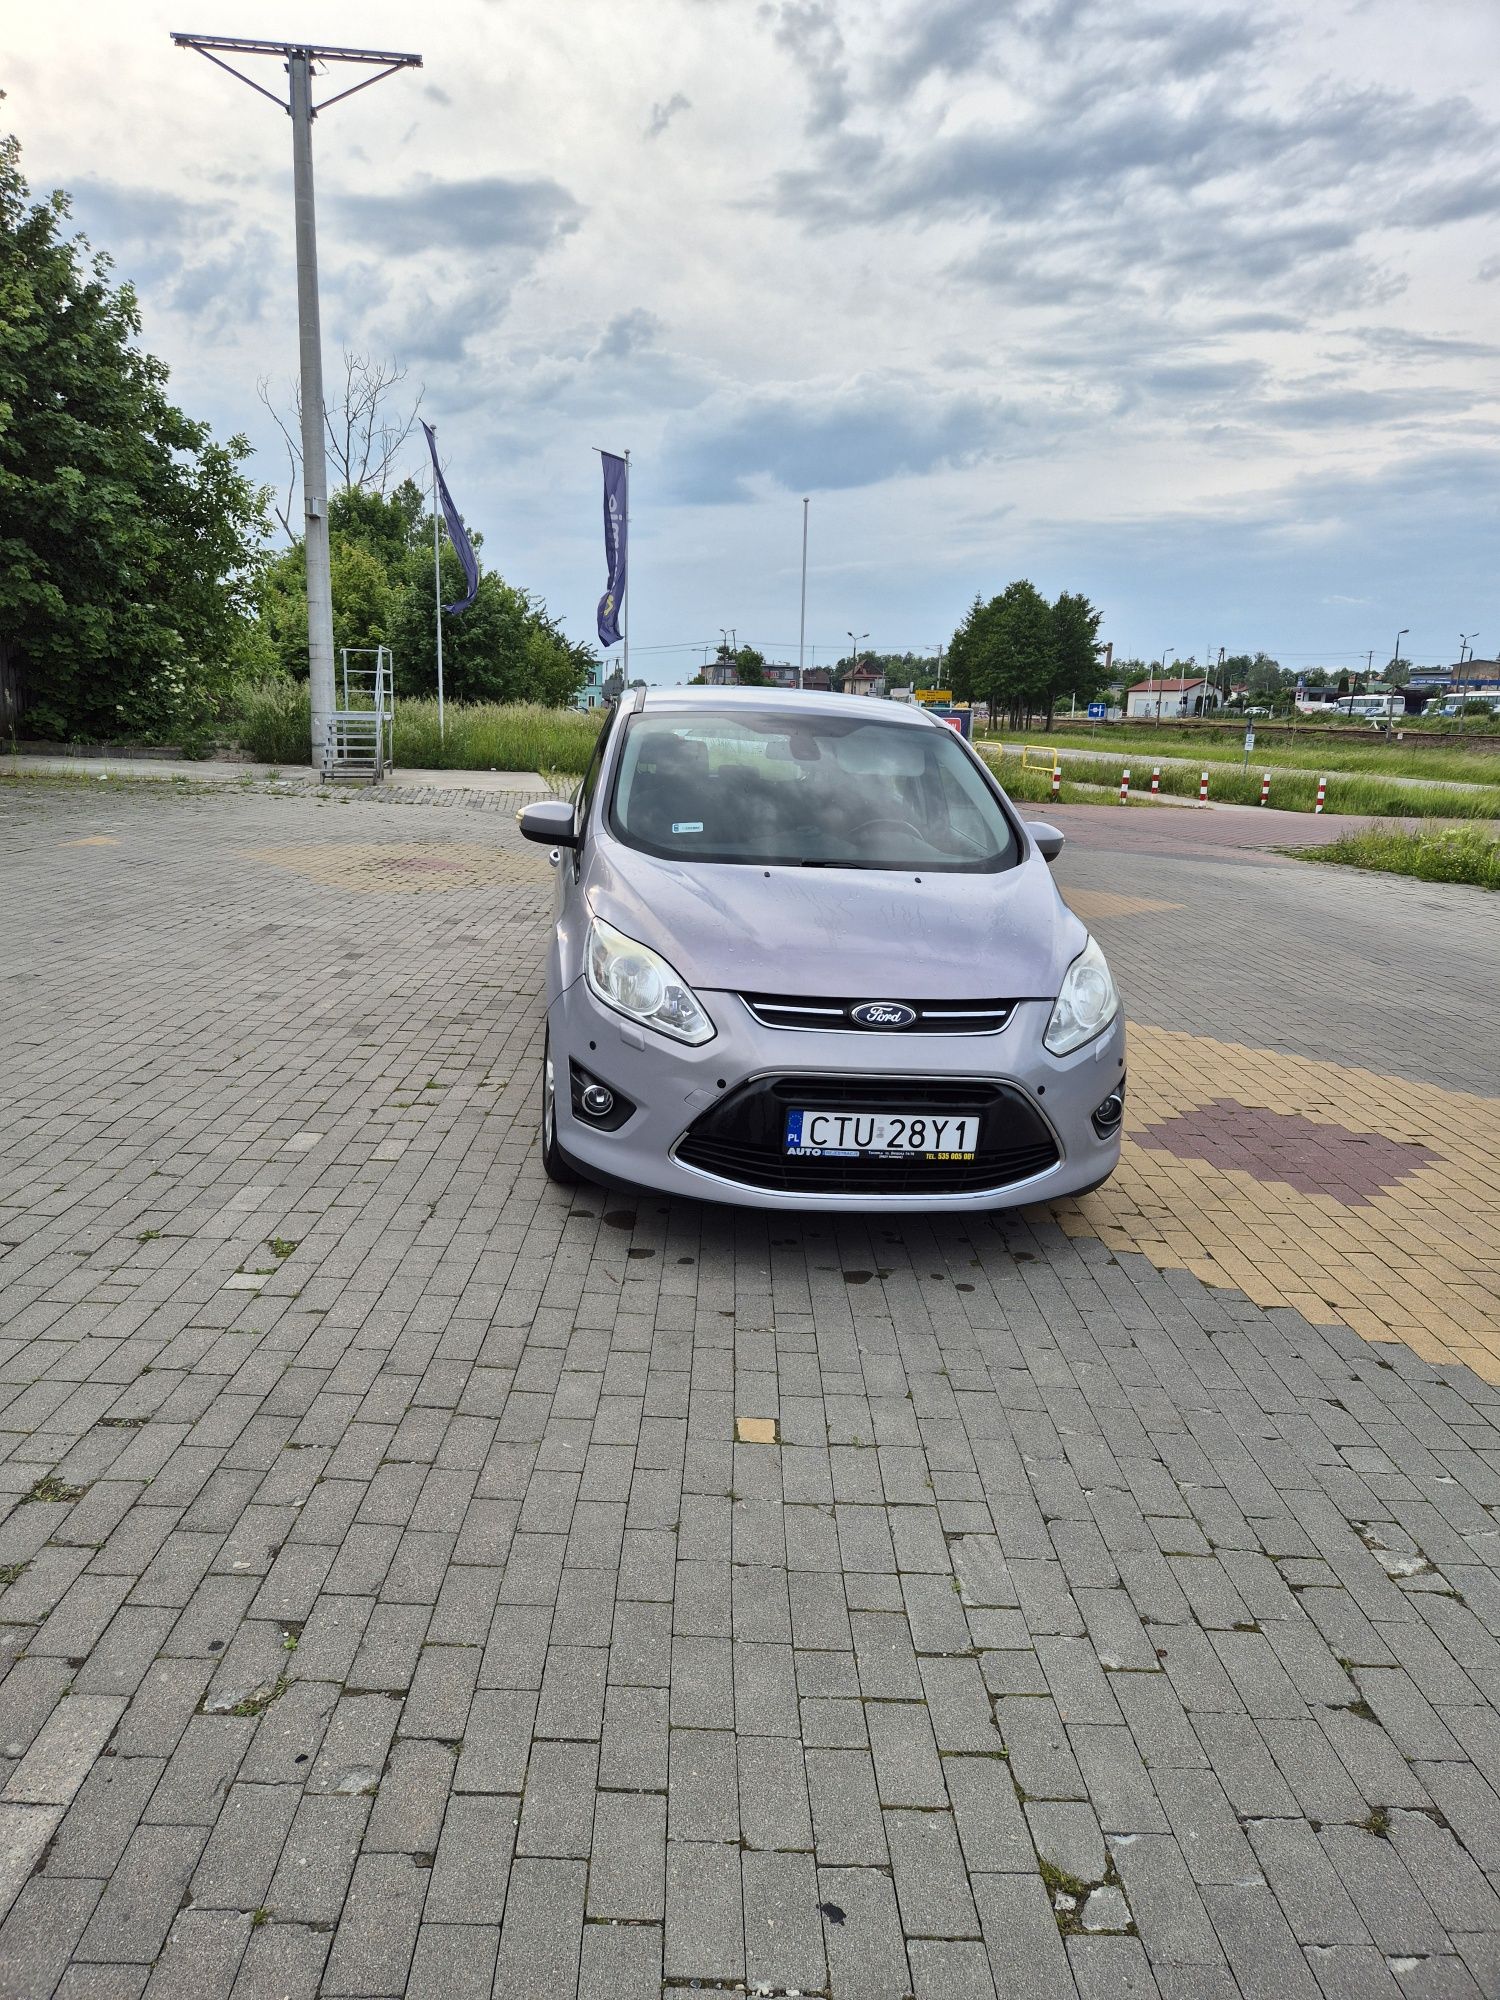 Ford c-max2 2010 rok